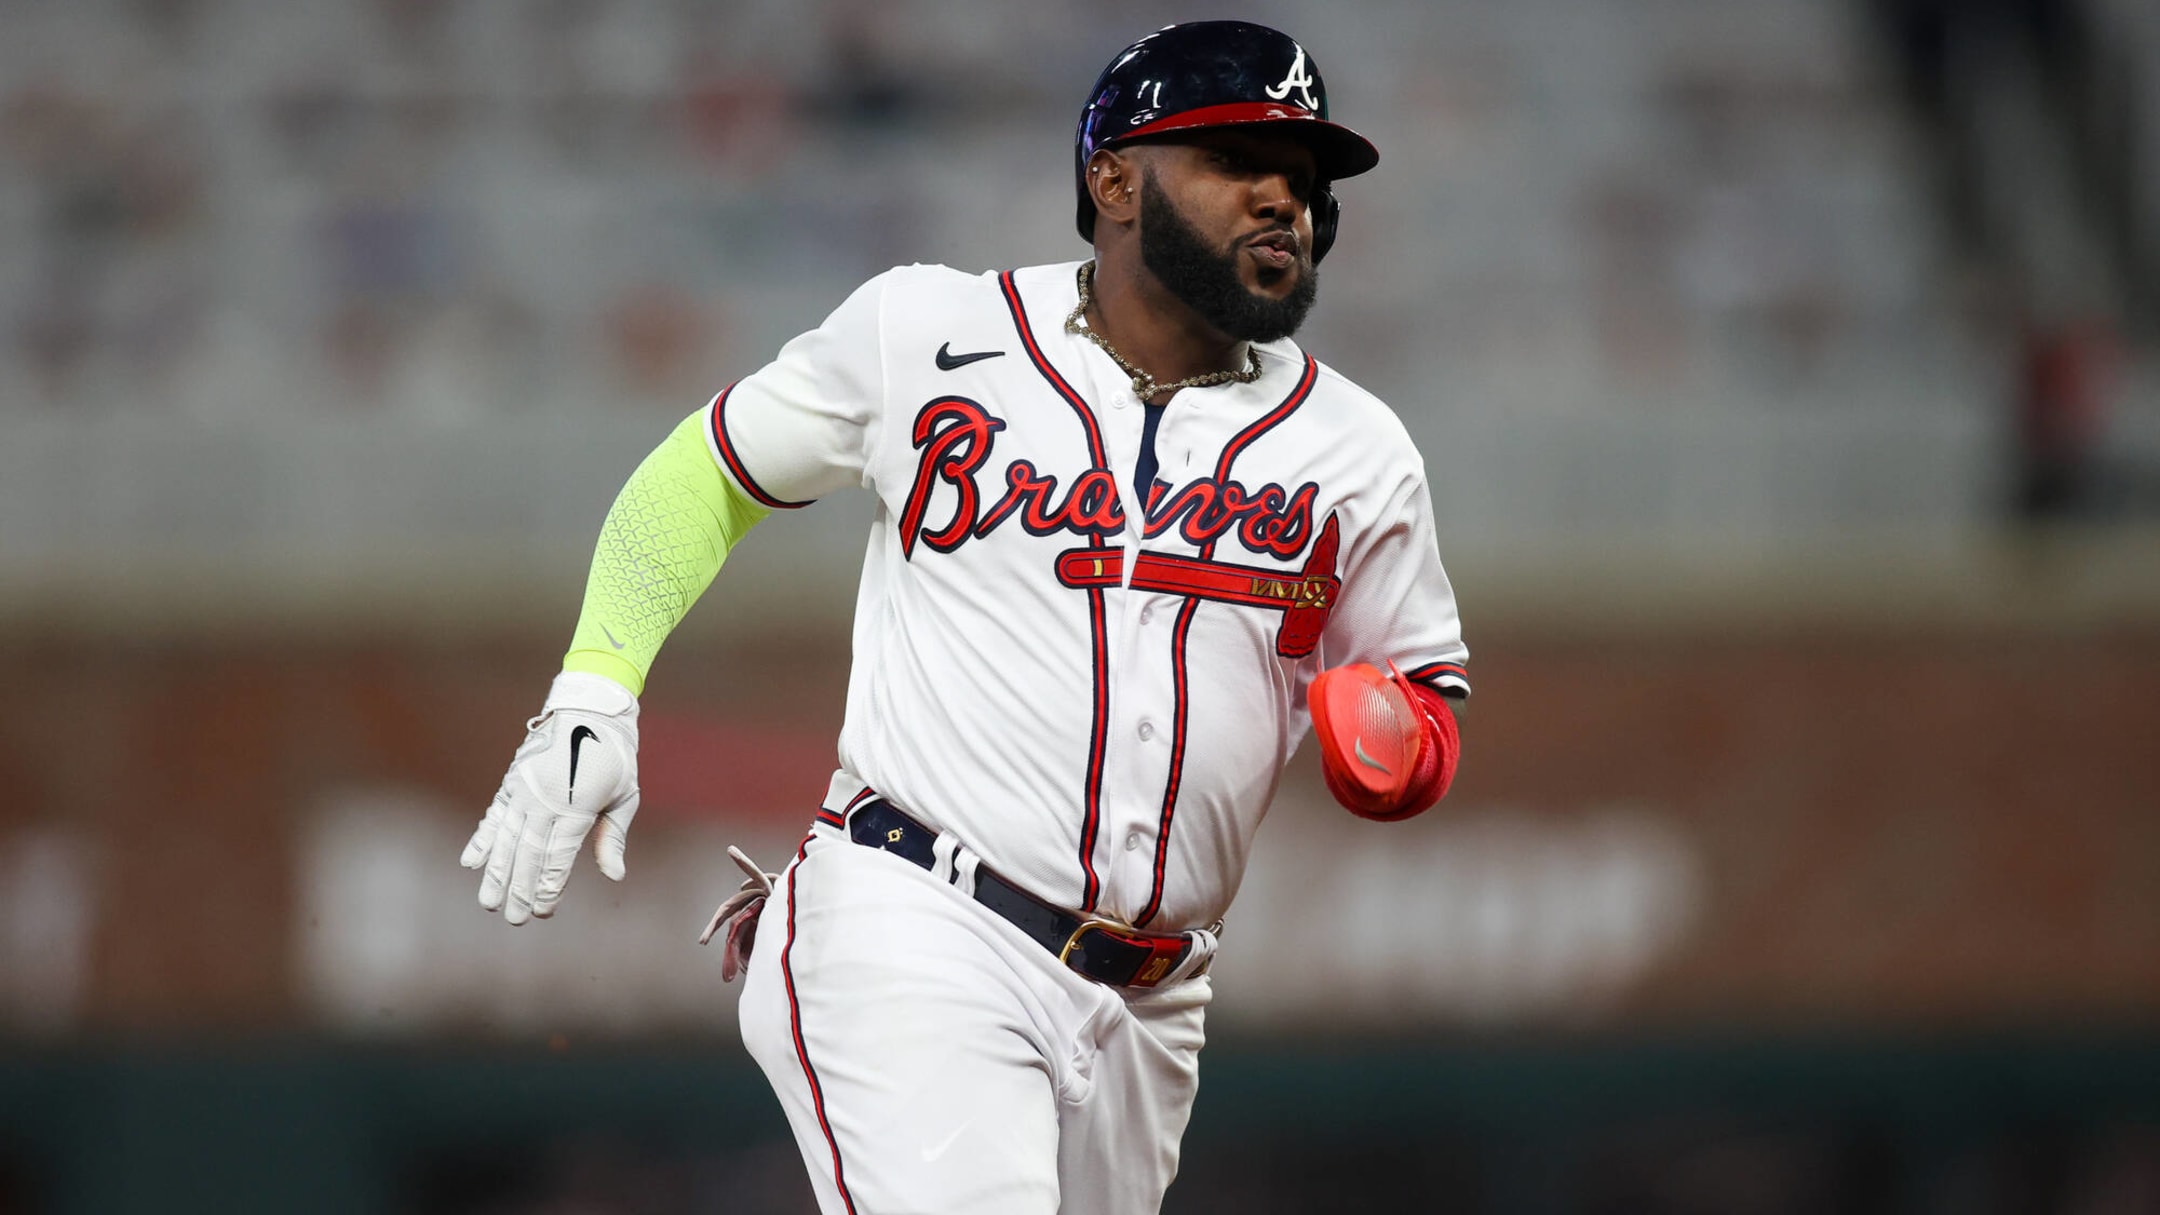 How much longer will the Braves play Marcell Ozuna?